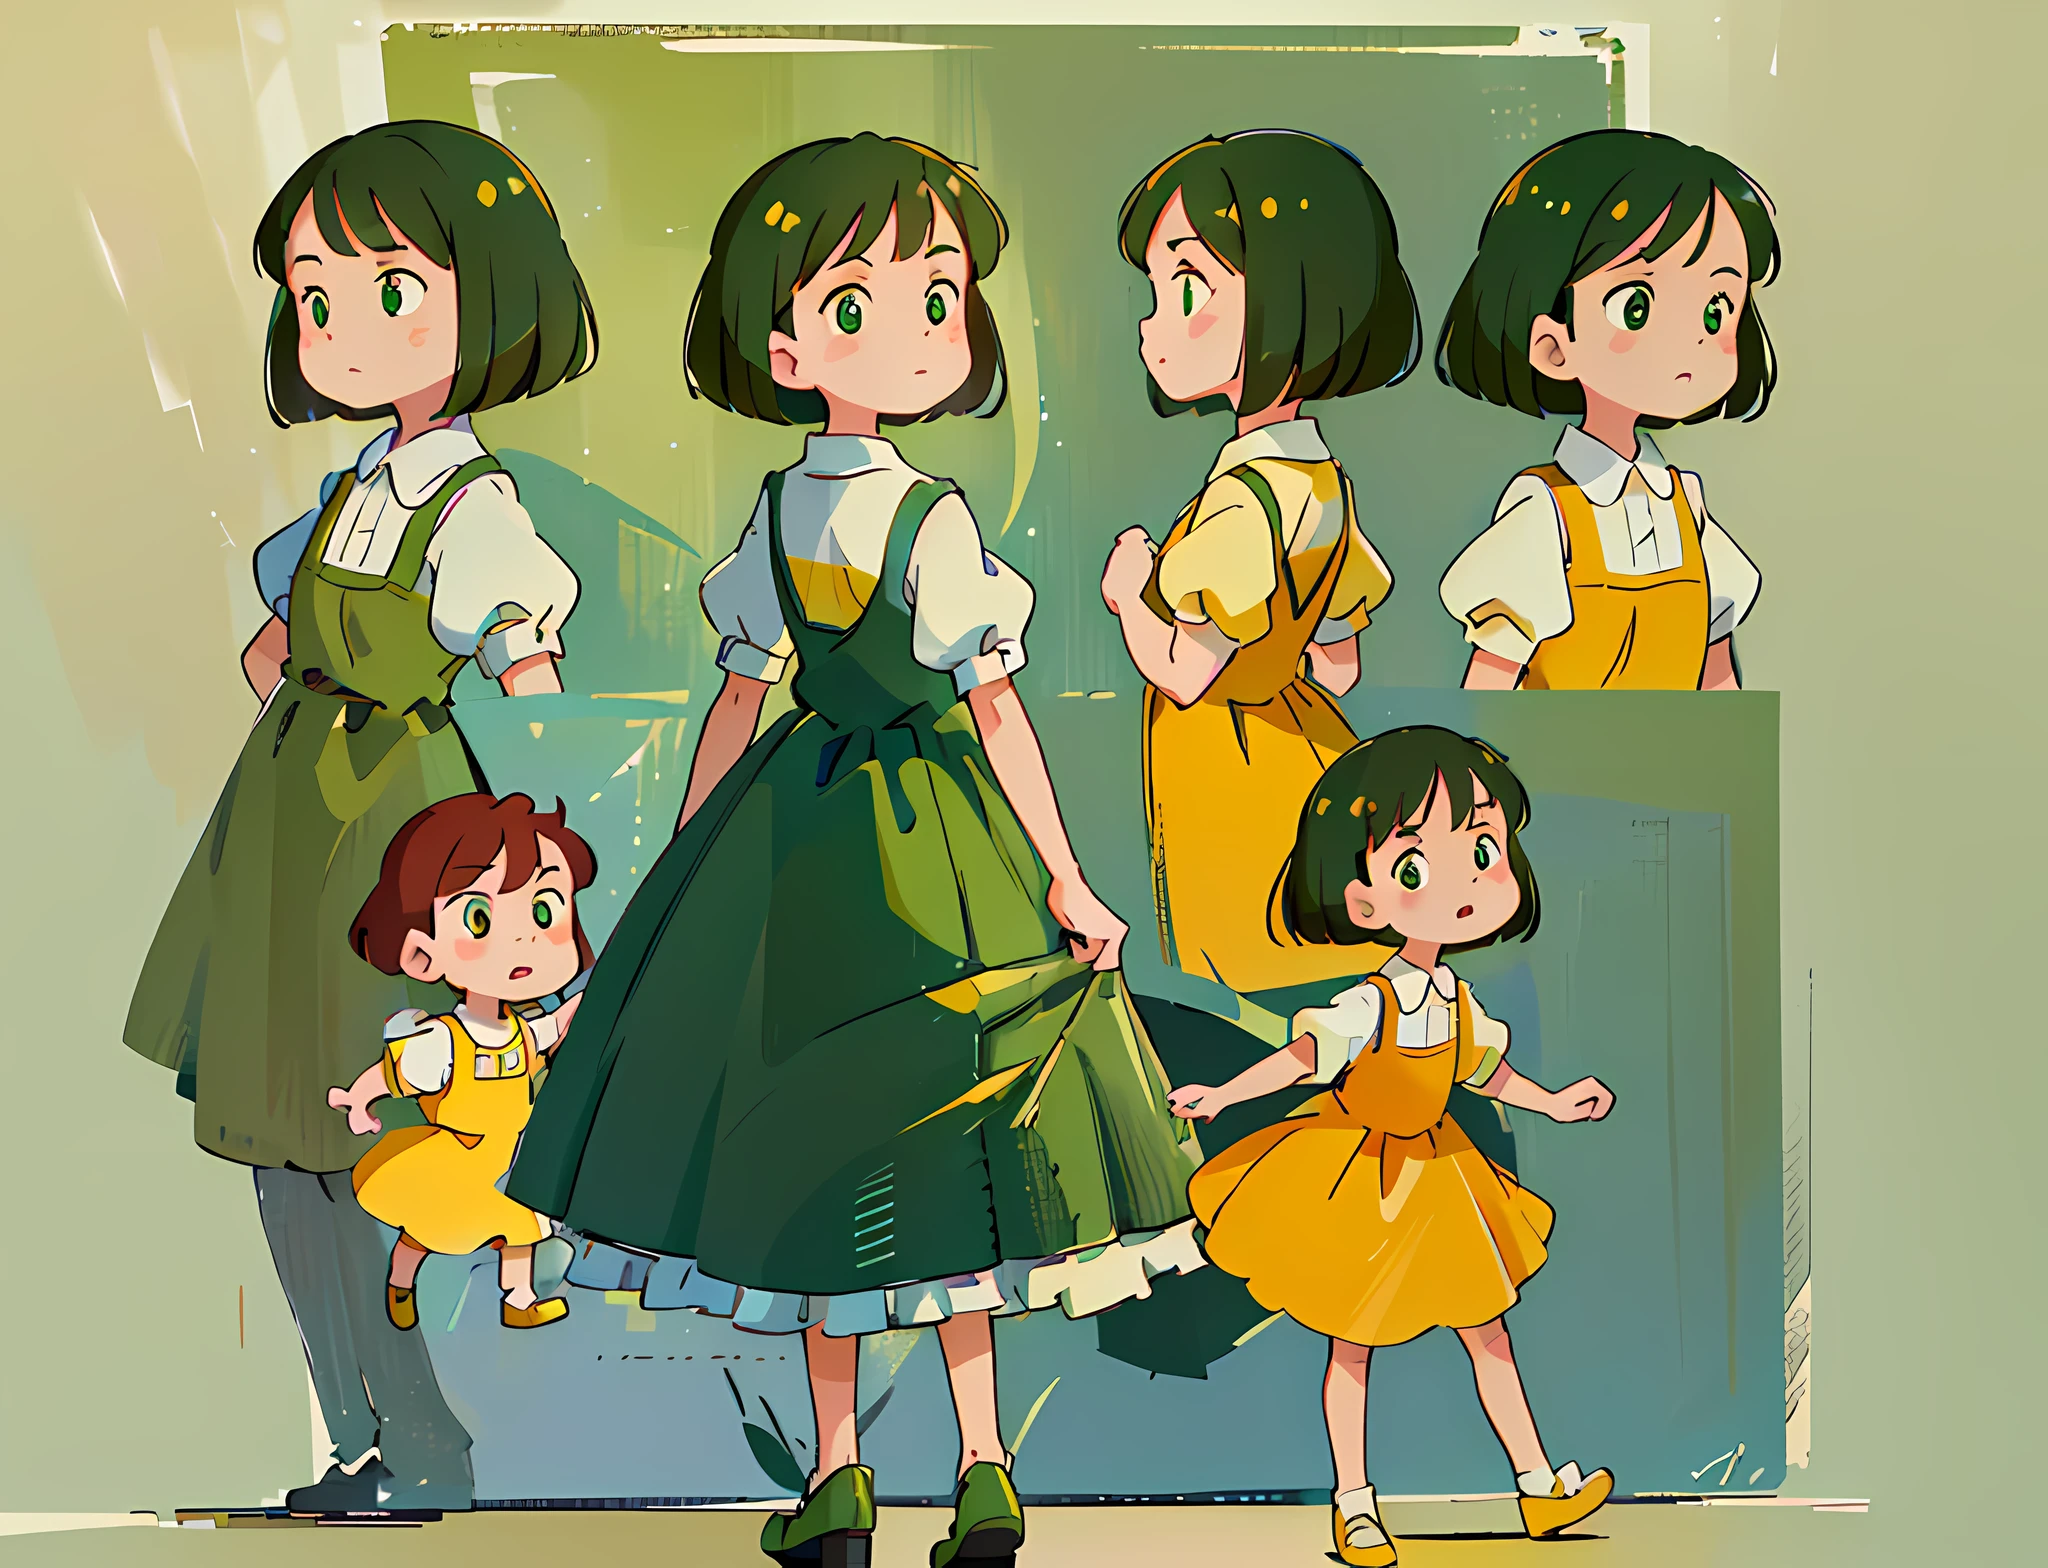 (master piece, high quality, 8k)  (full body) (same character front, back, side view) (model sheet) (multiple views of the same character) . 8k, (RAW photo, best quality), beautiful detailed green eyes, extremely detailed eyes and face, perfect anatomy, an extremely delicate and cute cubby face, short bob style red hair, adorable yellow dress.